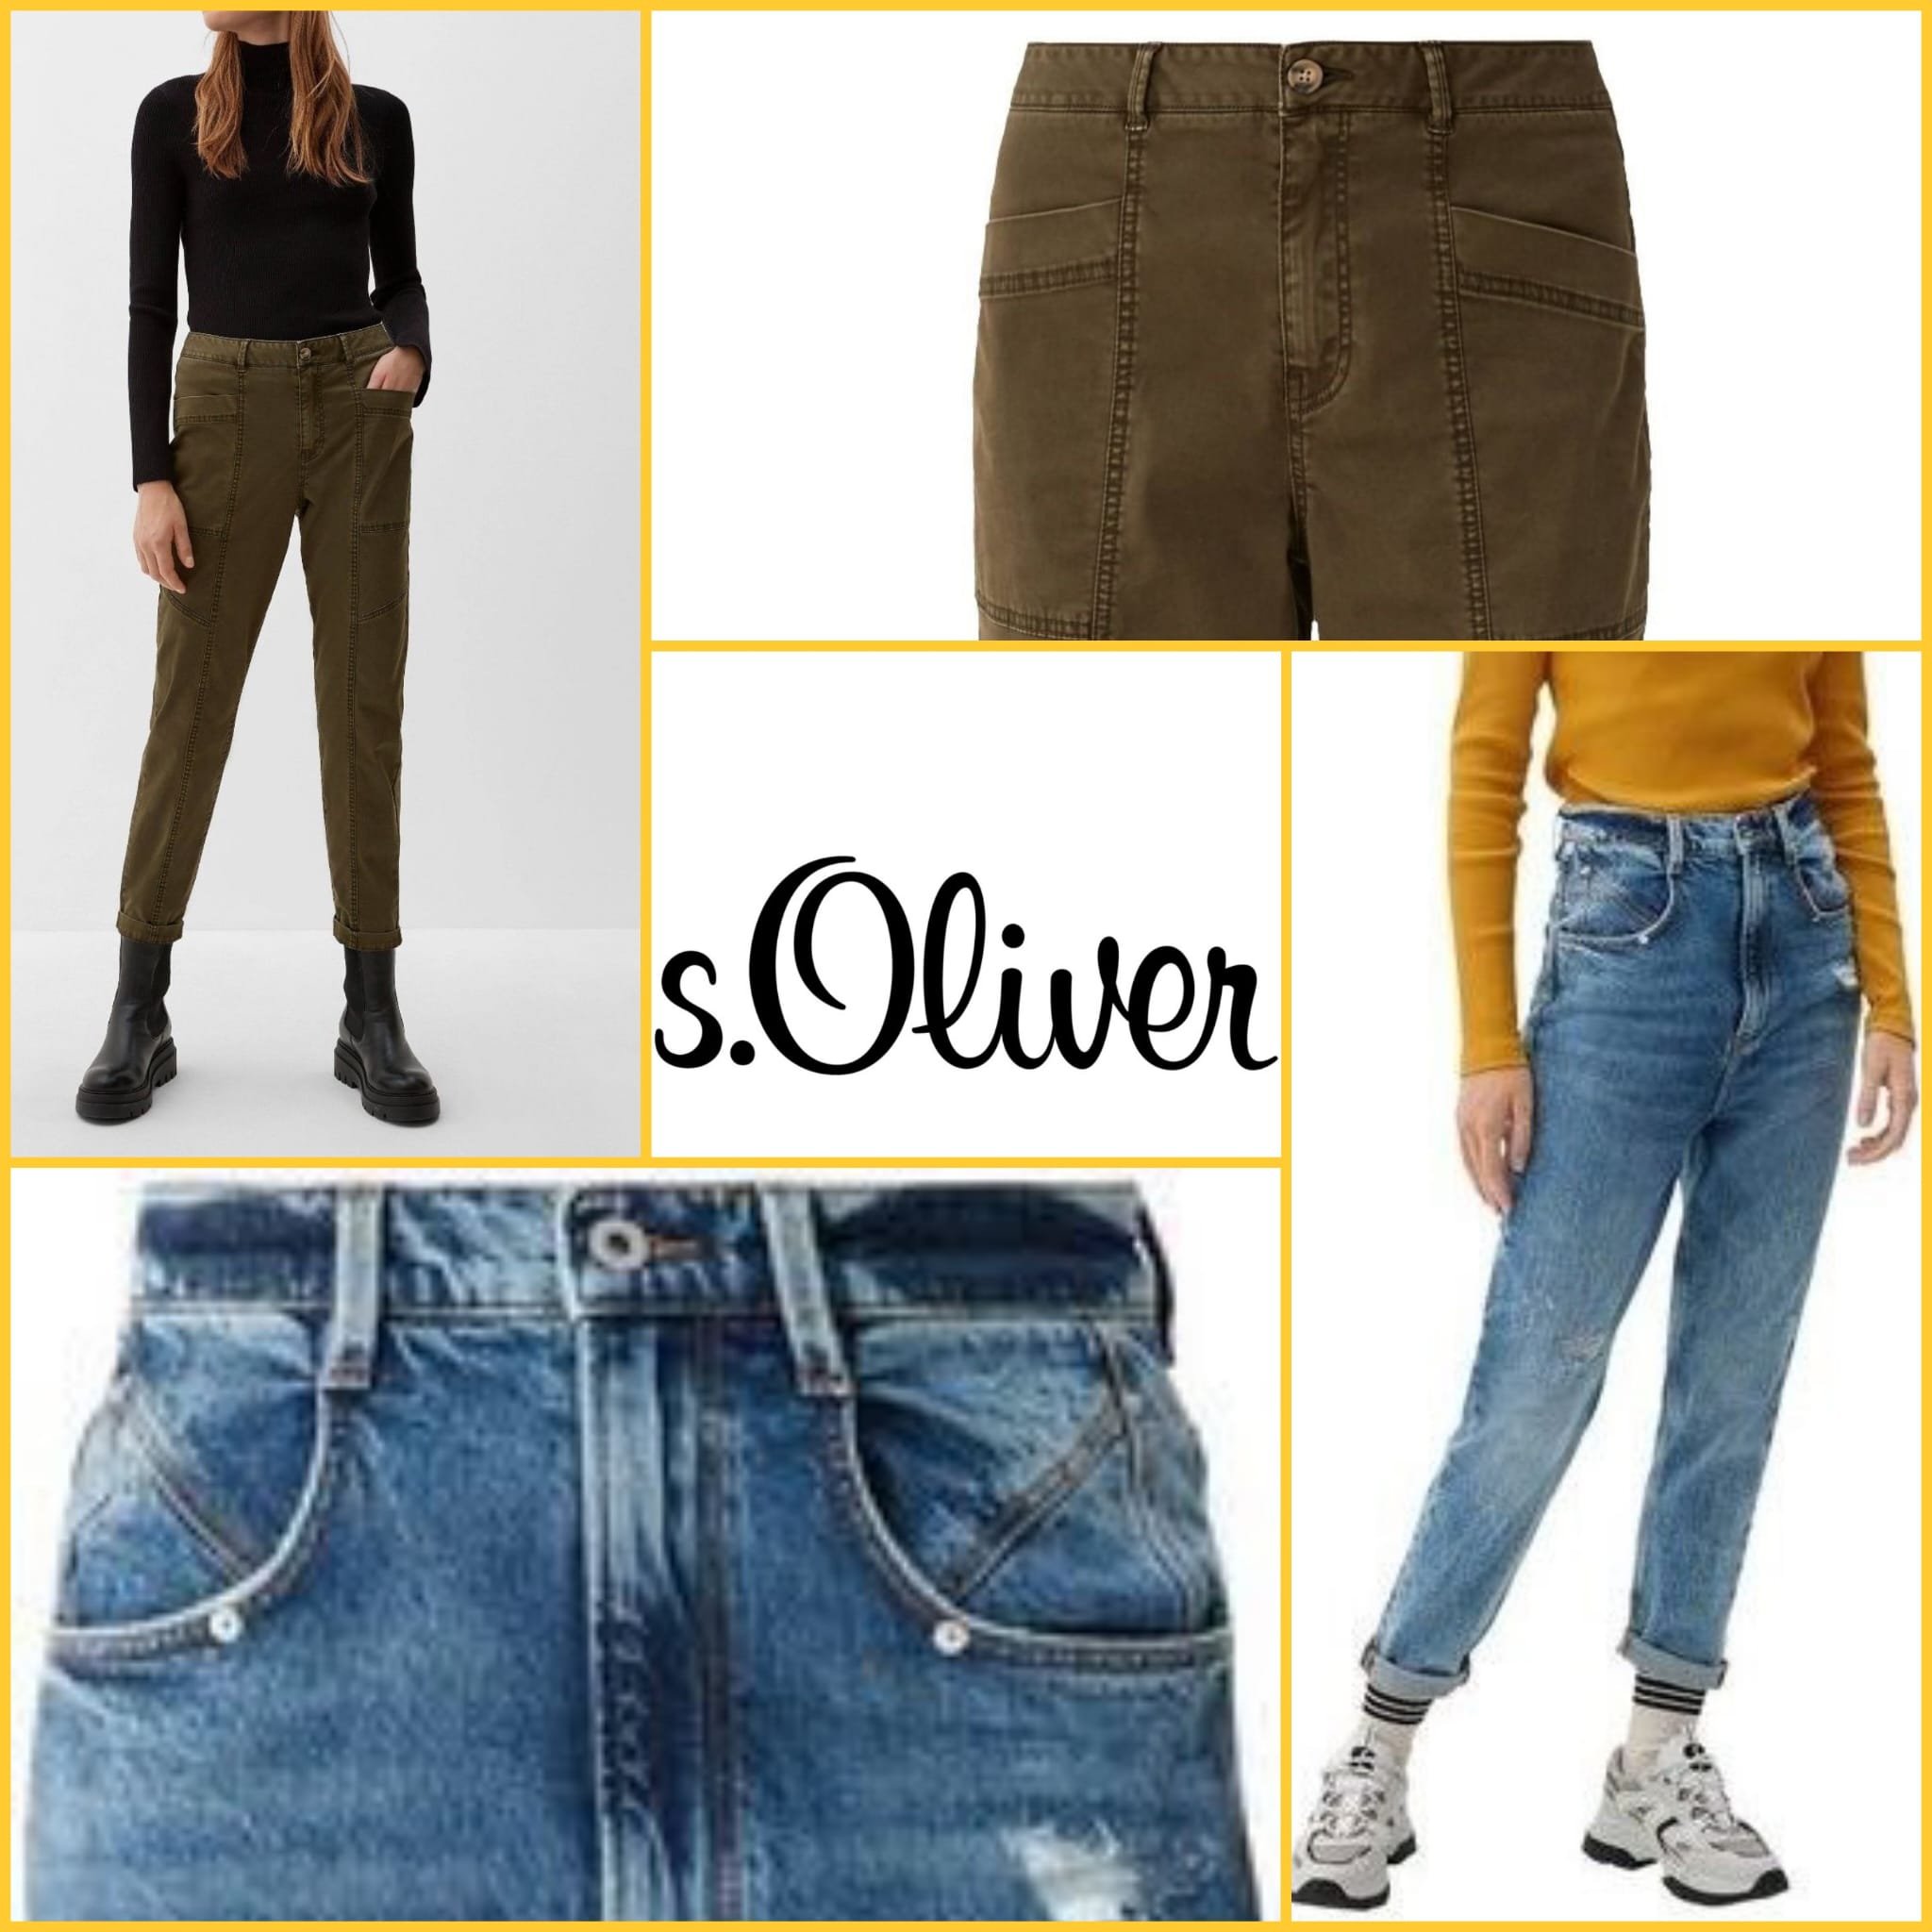 Women's jeans from S.Oliver